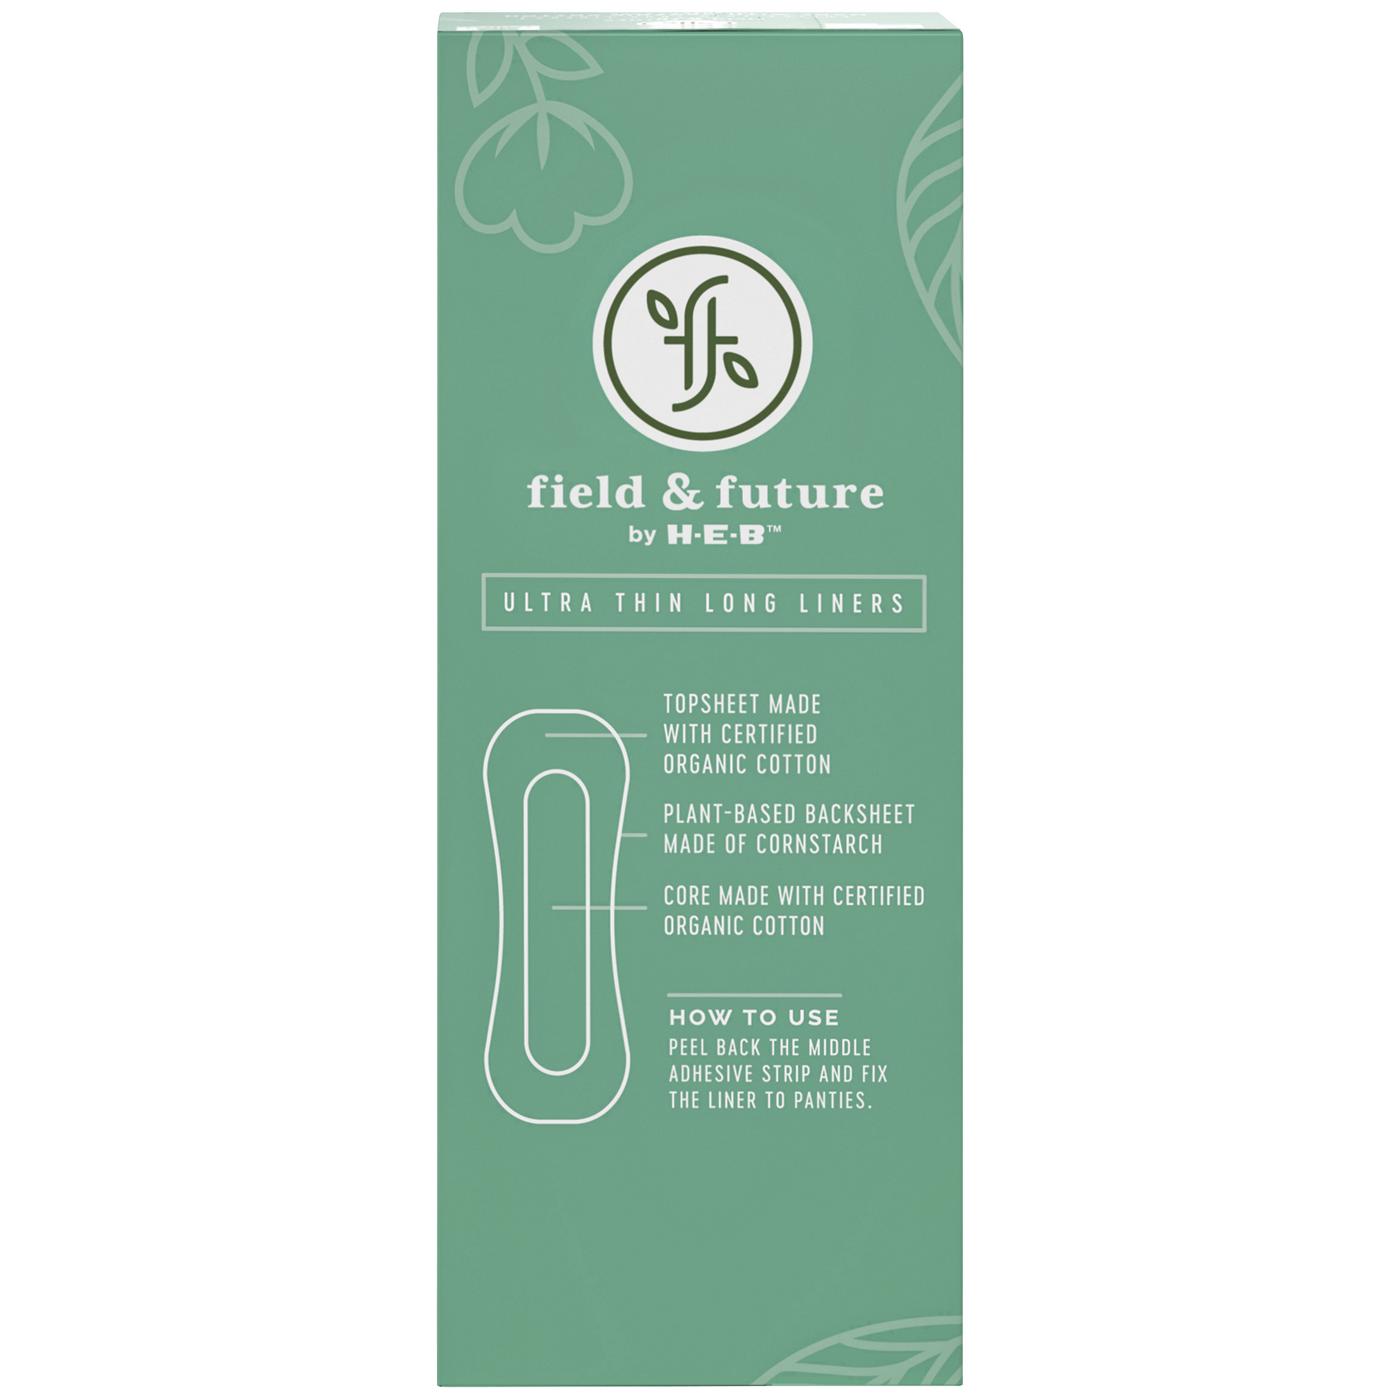 Field & Future by H-E-B Organic Cotton Ultra Thin Liners – Extra Long; image 3 of 5